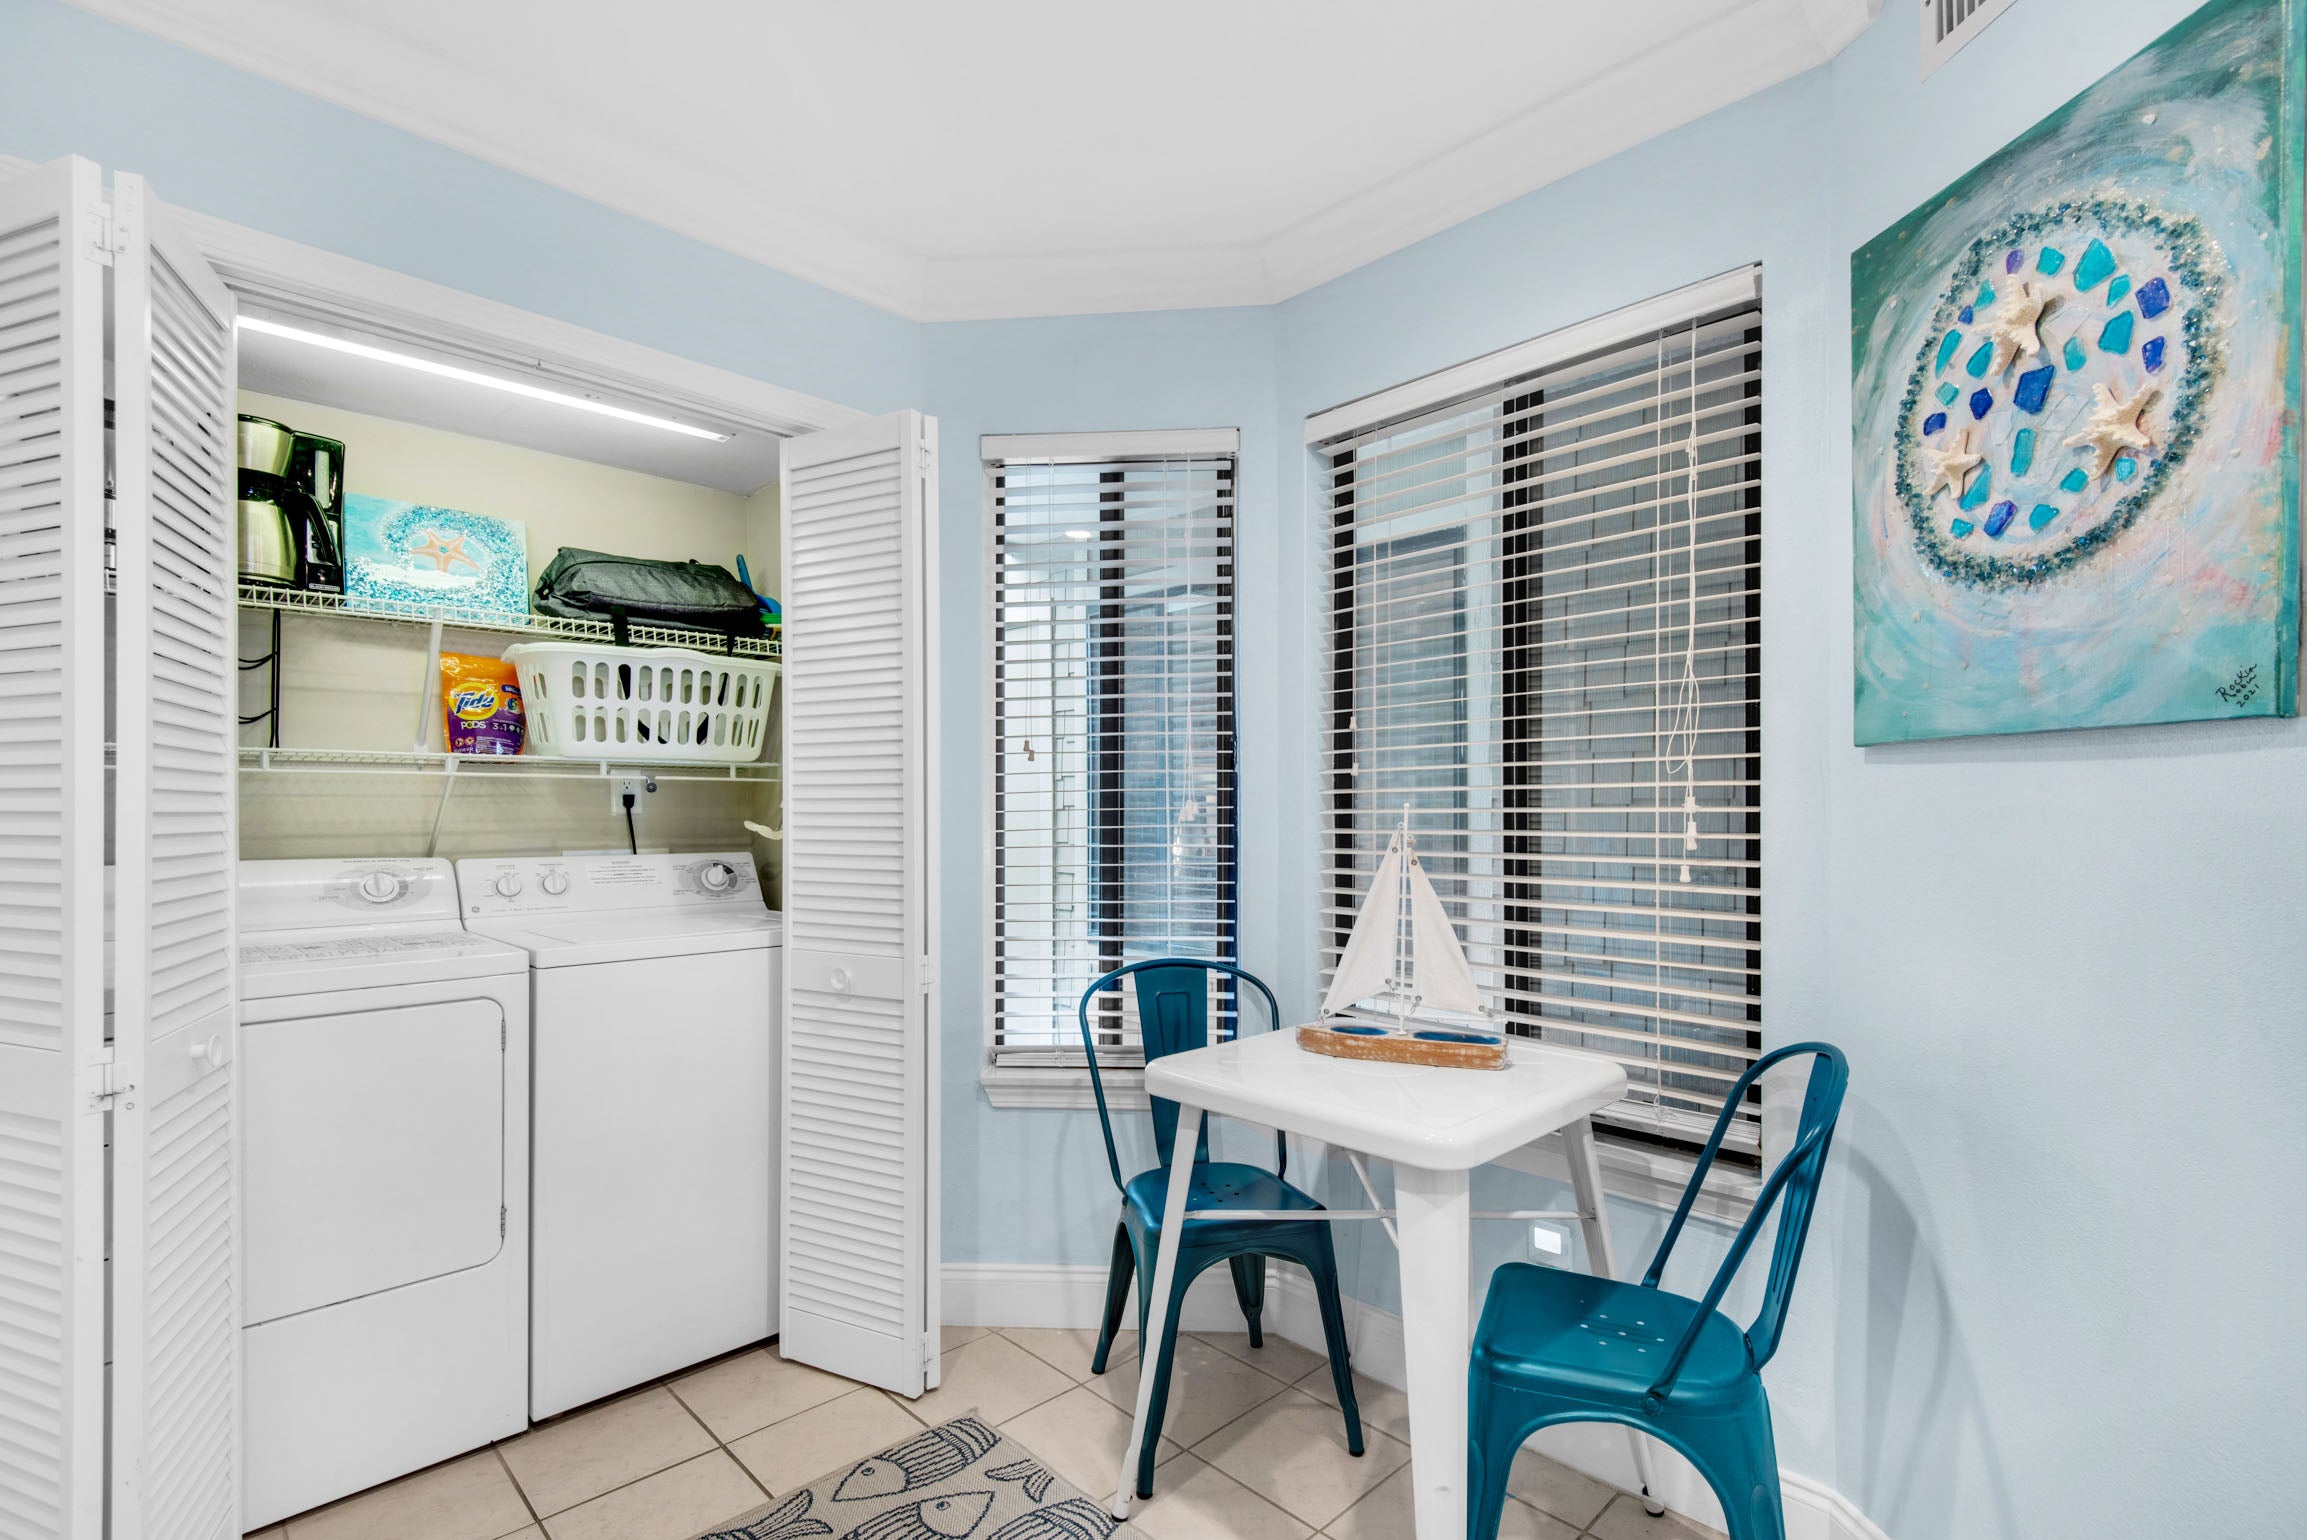 Breakfast nook with washer and dryer